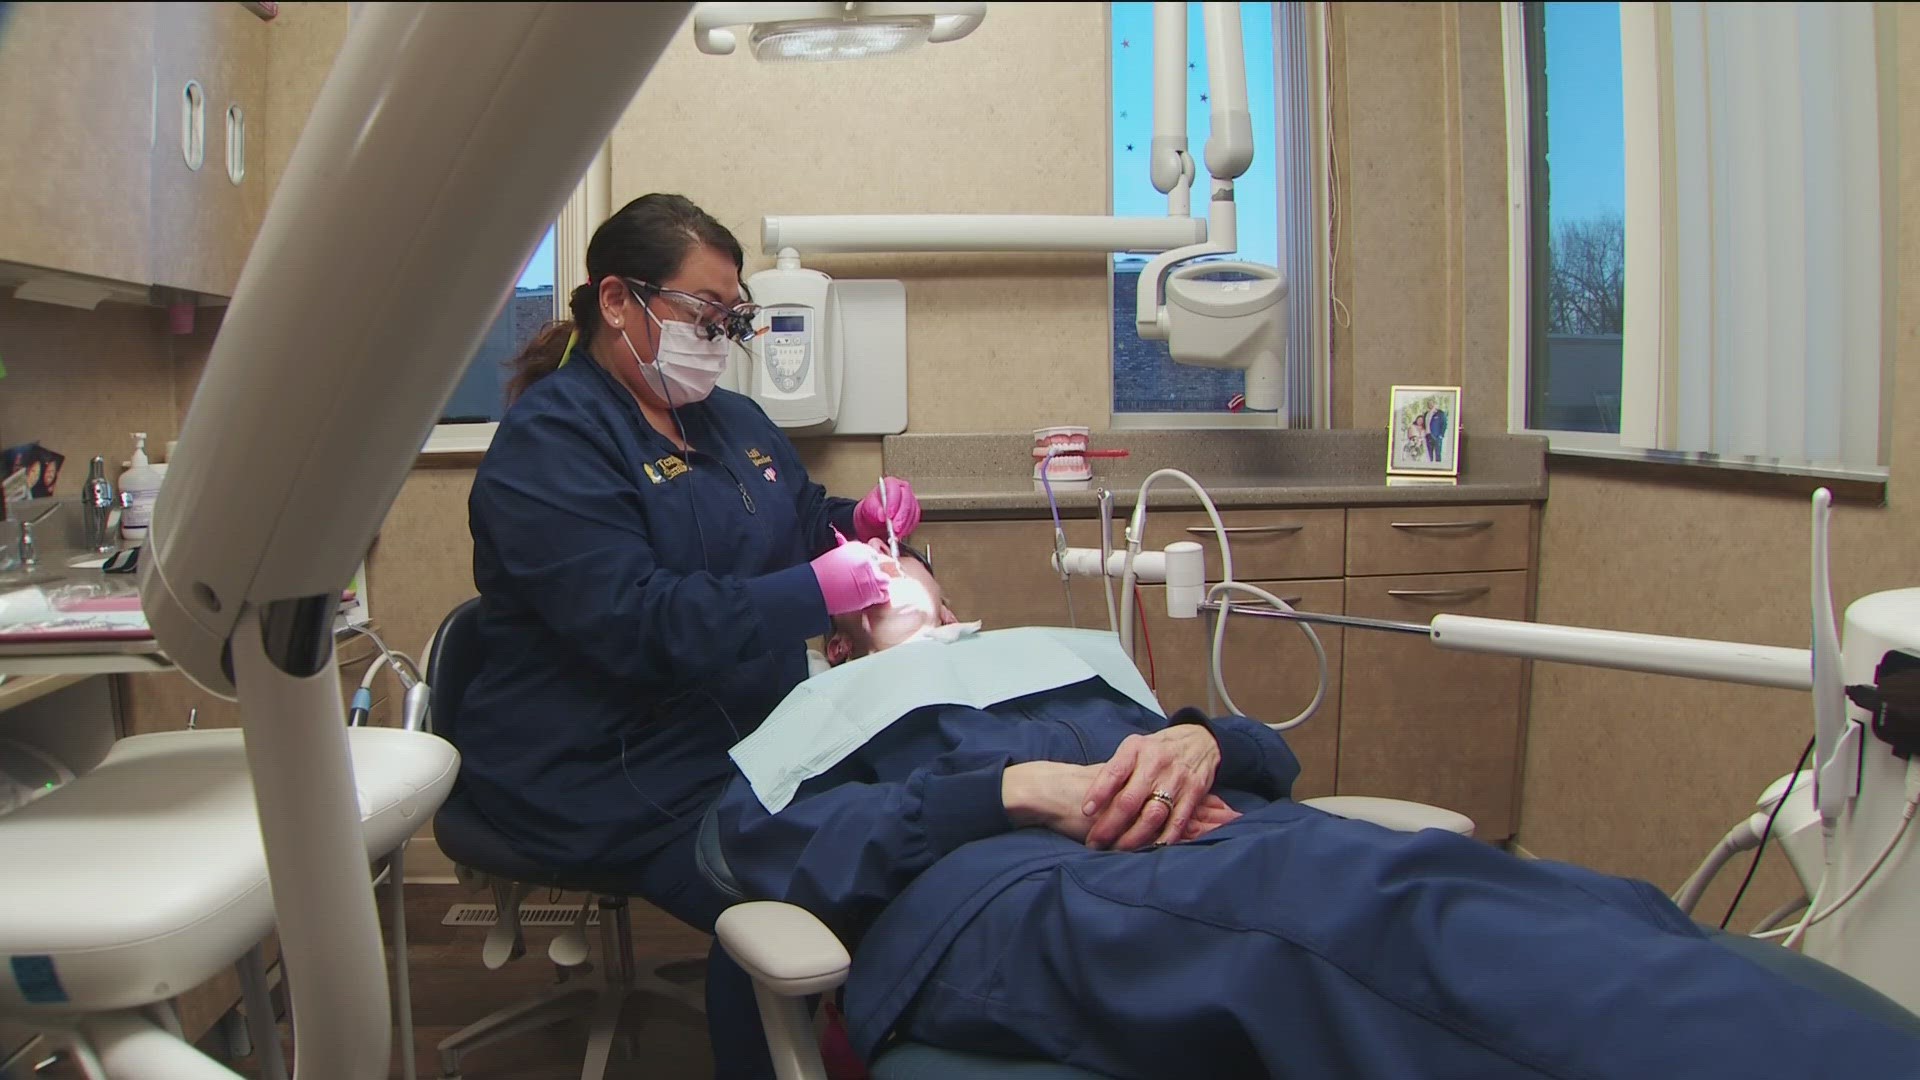 The American Dental Association says one in three dentists have trouble filling assisting and hygienist positions.